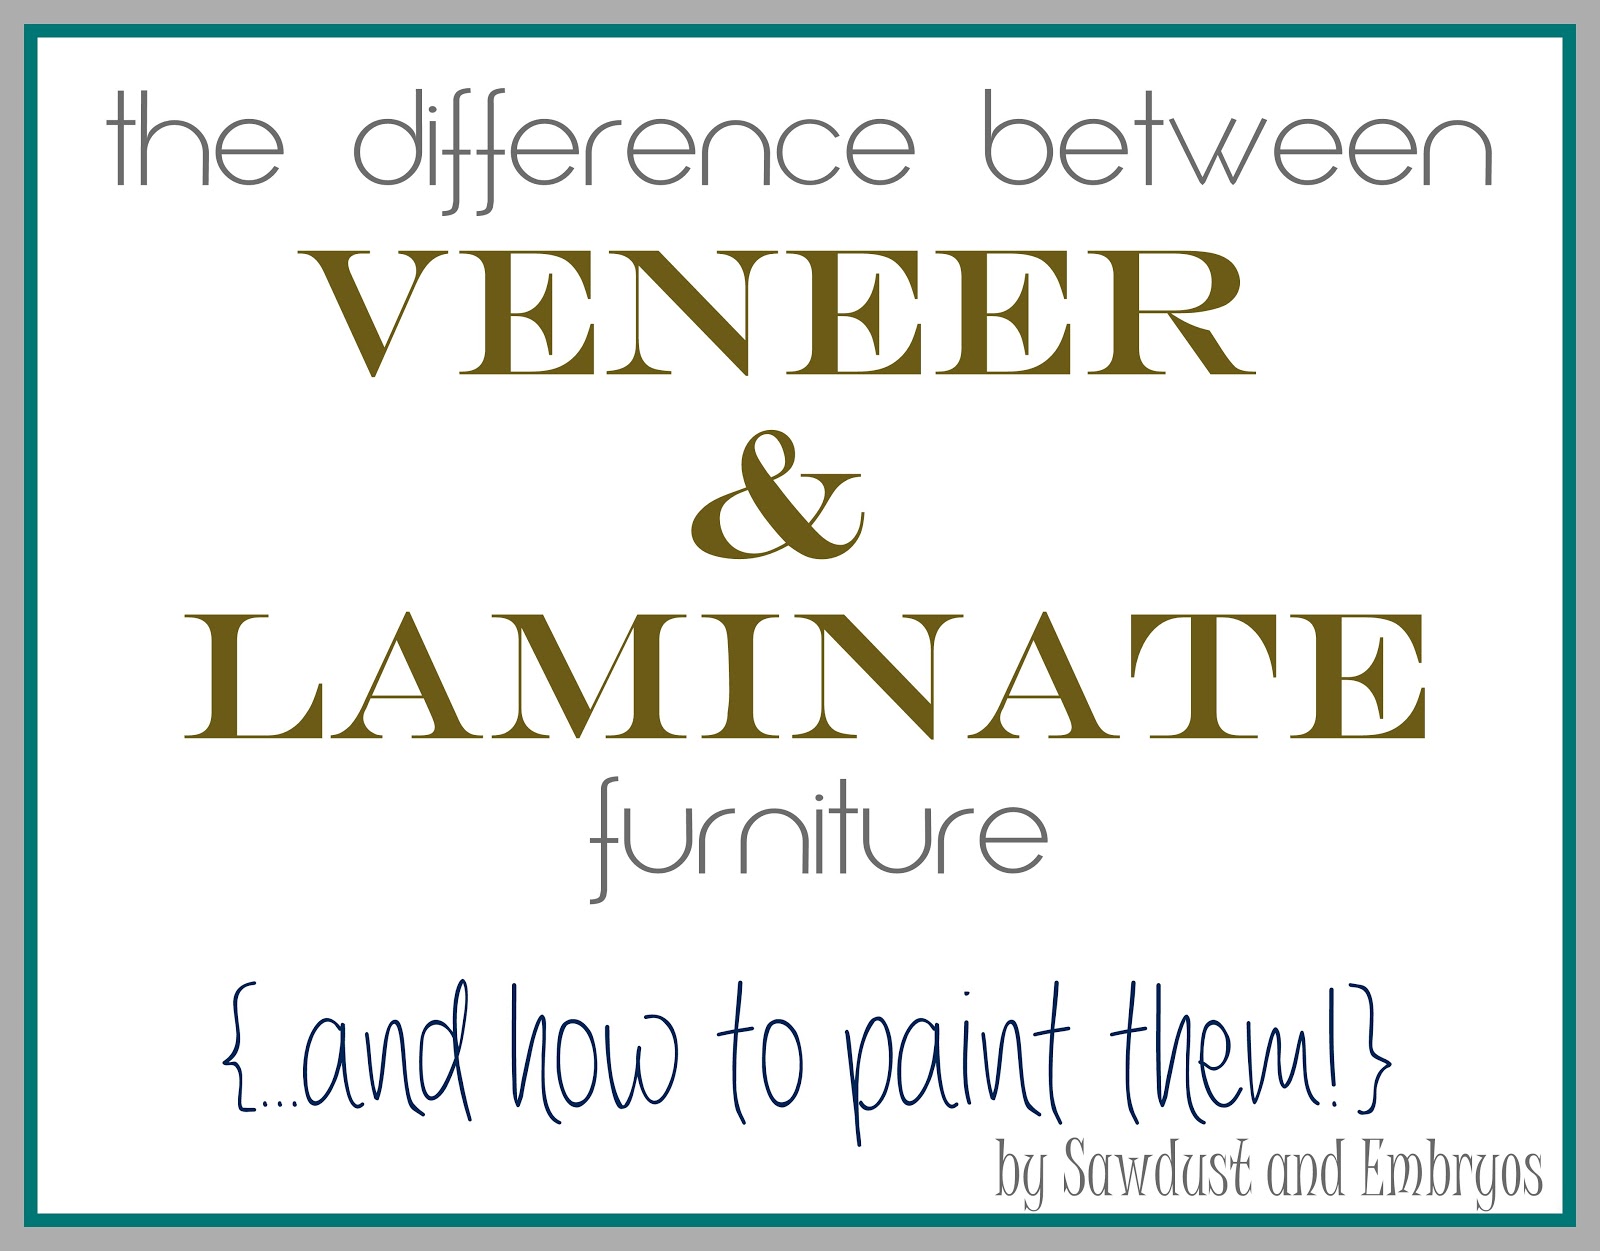 [Learn%2520about%2520the%2520difference%2520between%2520veneer%2520and%2520laminate%2520furniture...%2520and%2520how%2520to%2520paint%2520them%2521%2520%257BSawdust%2520and%2520Embryos%257D%255B14%255D.jpg]